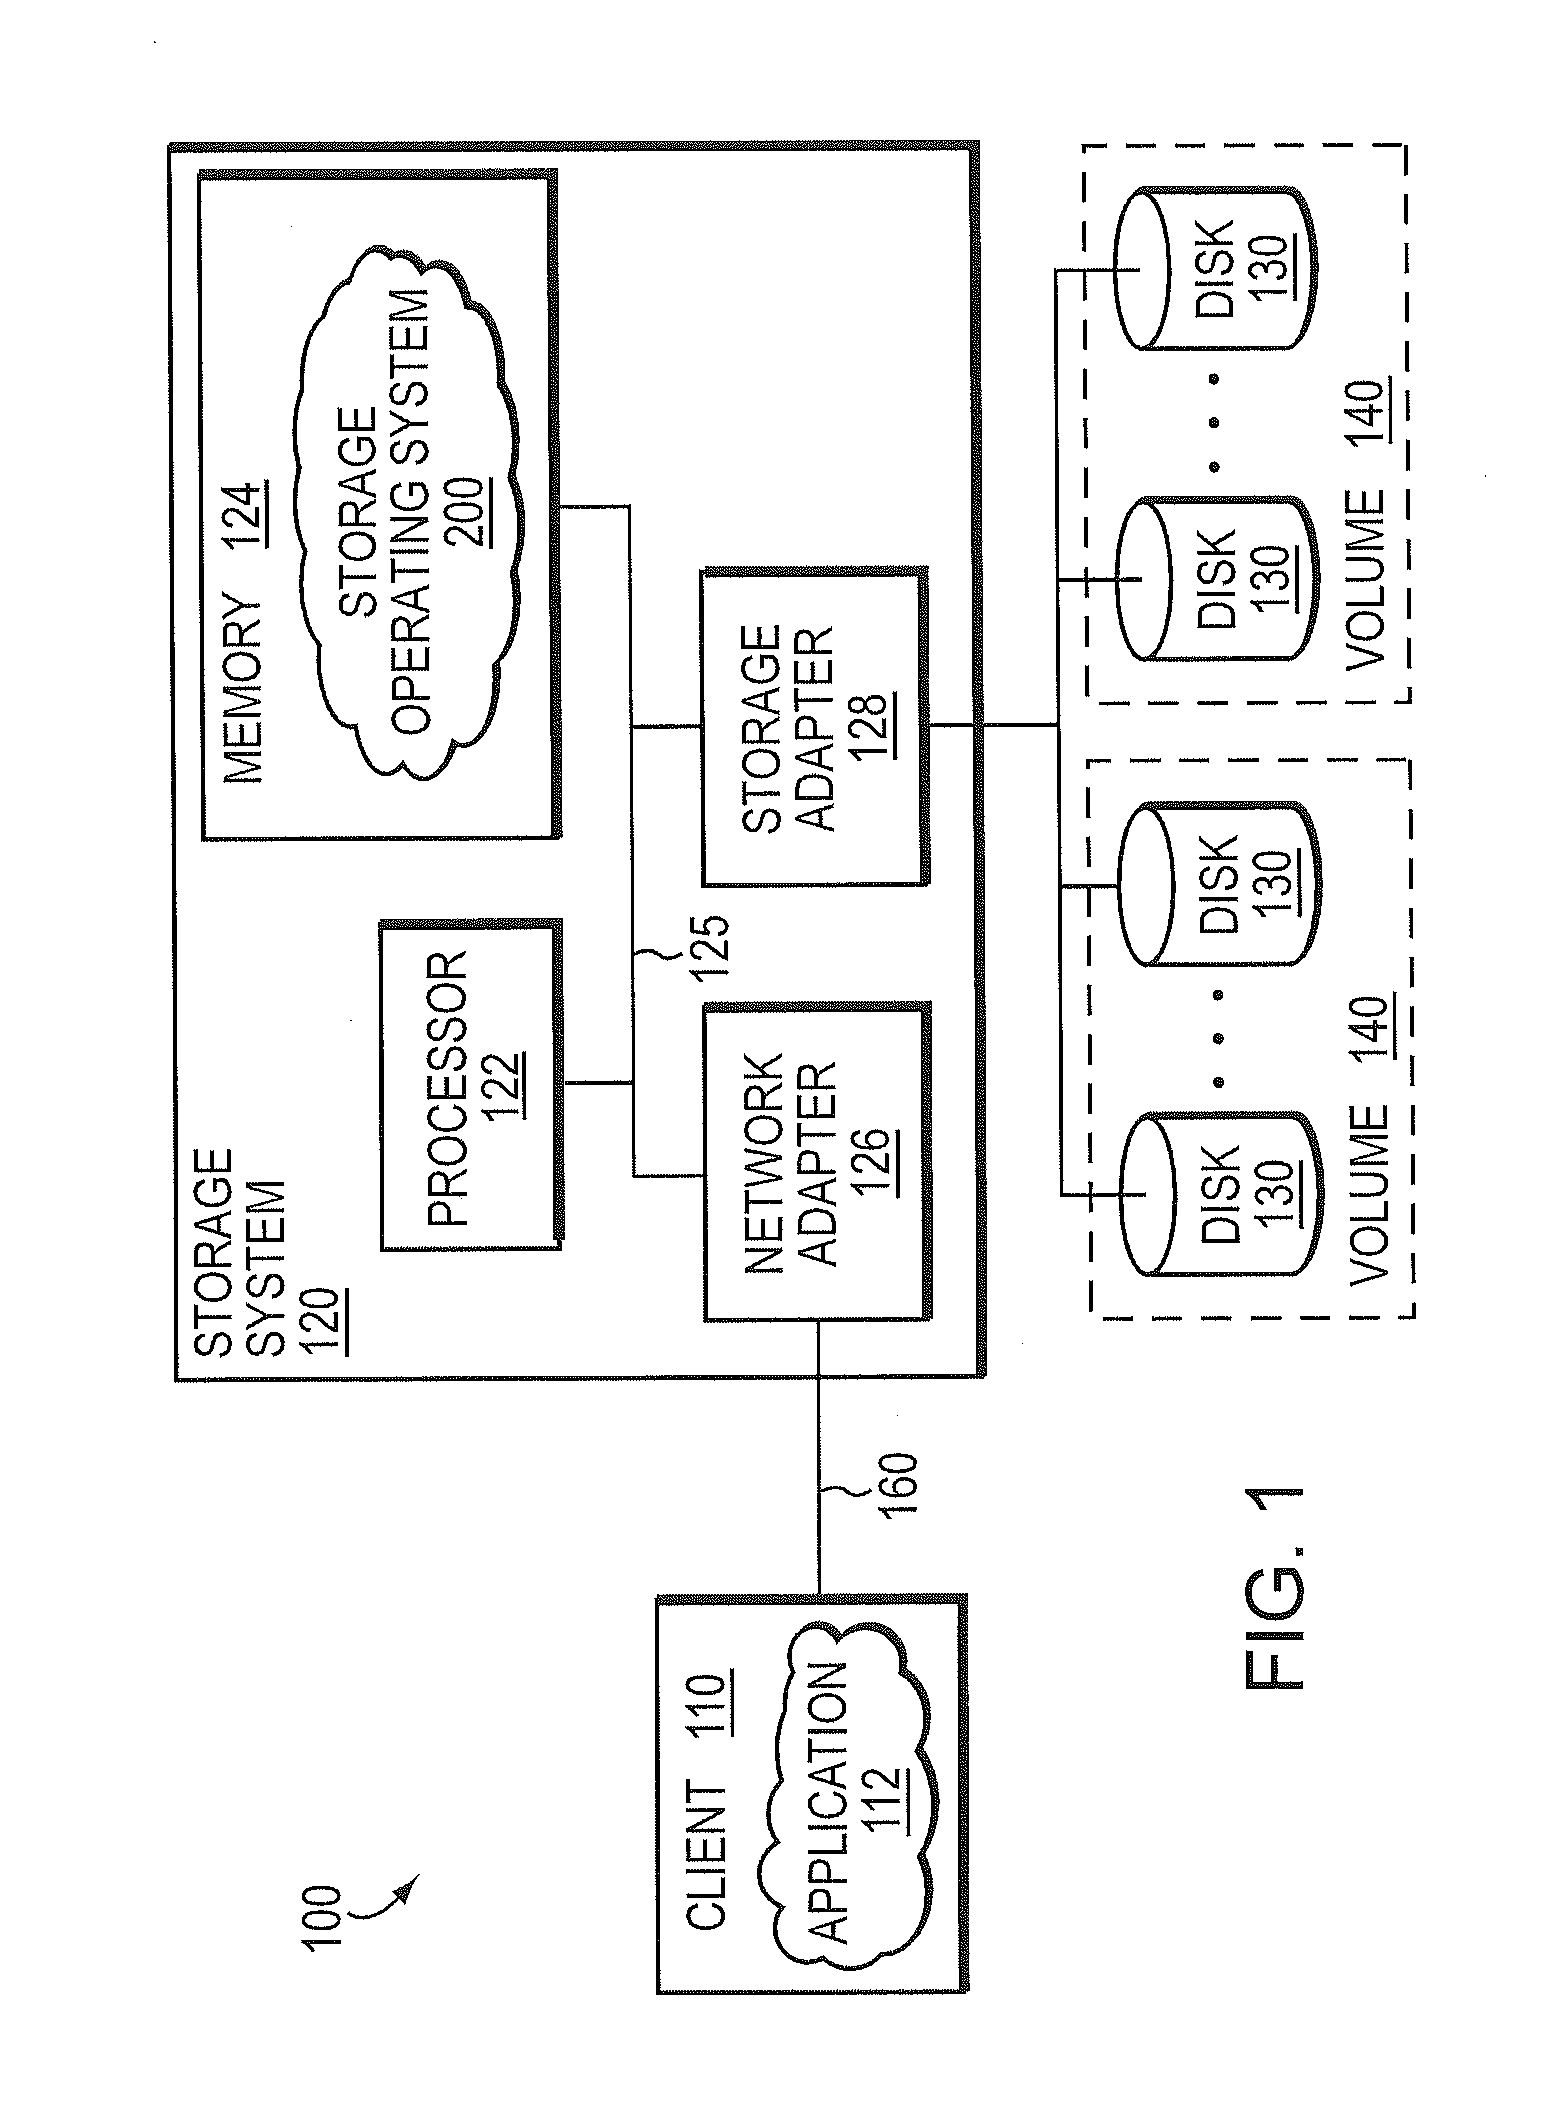 File system capable of generating snapshots and providing fast sequential read access